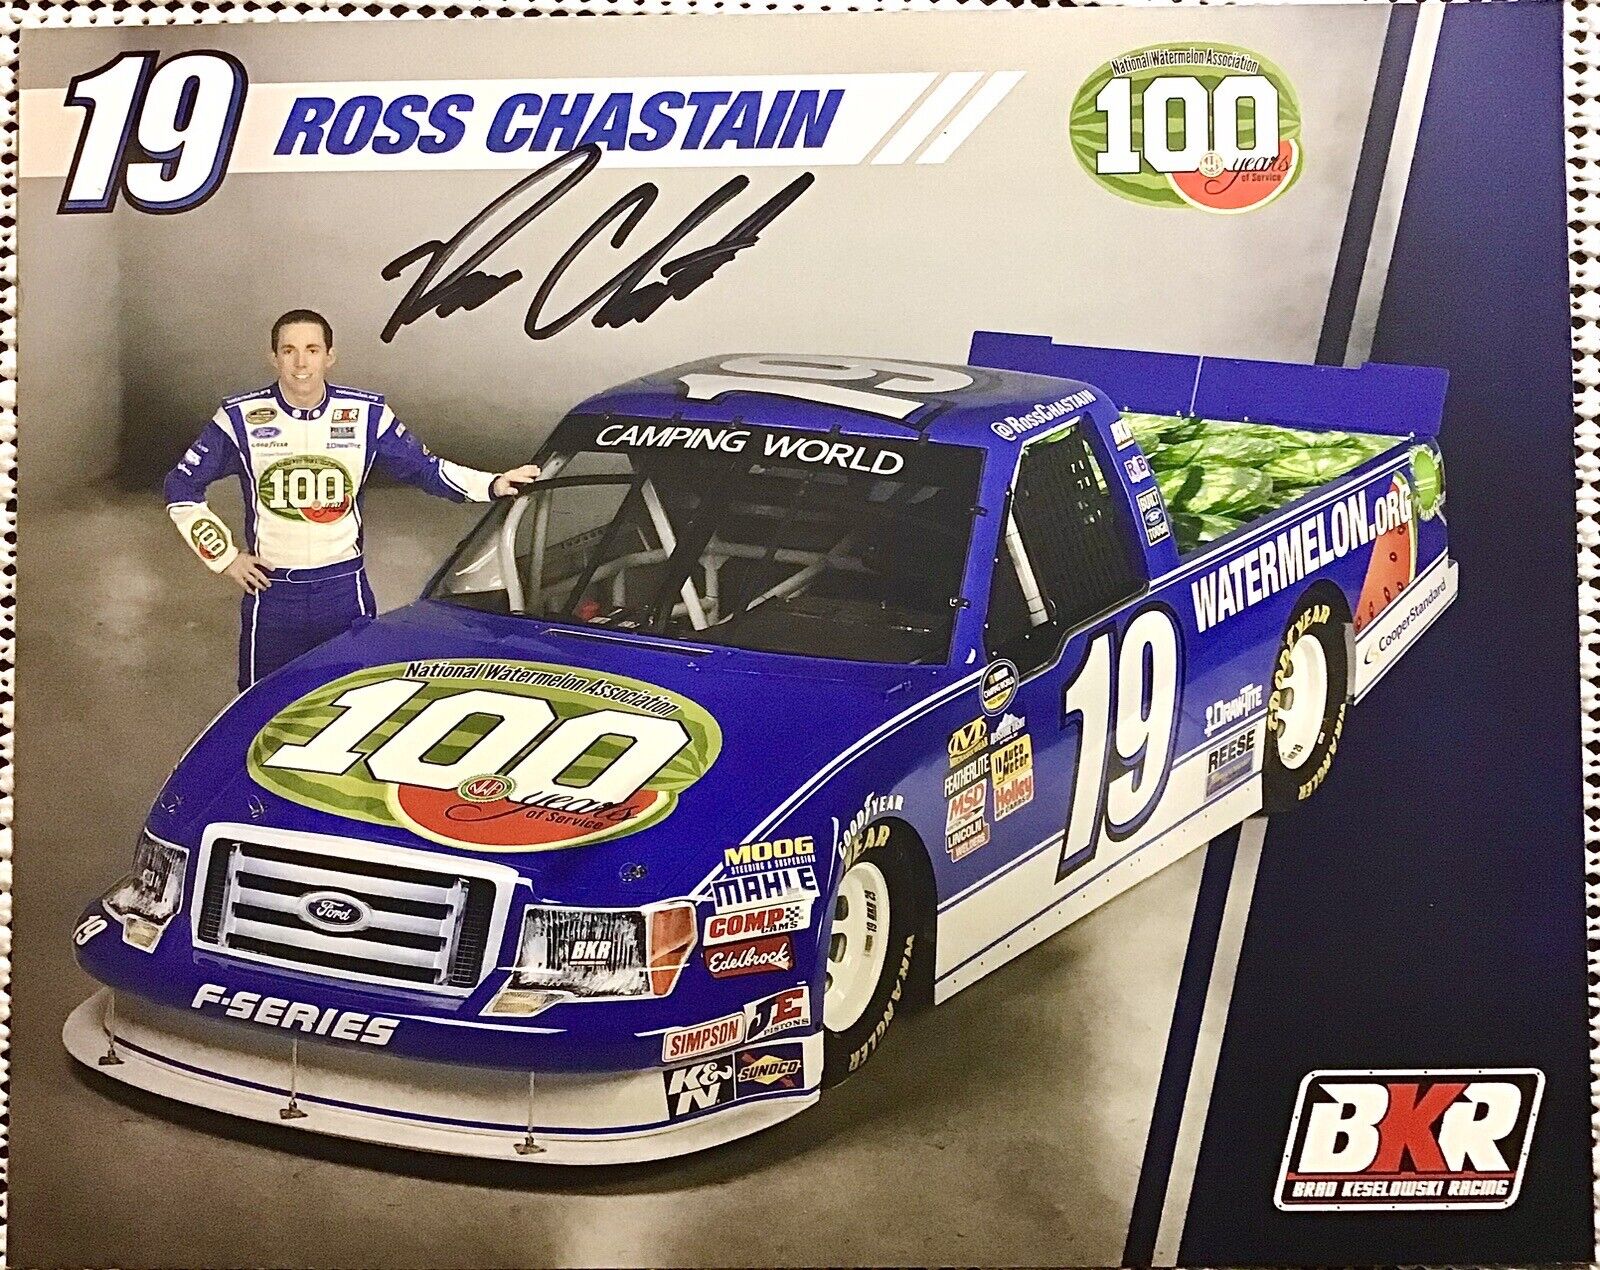 NASCAR-{Ross Chastain 19 y/o Autograph #19}-{2012 Truck Series}-Hero Card RARE